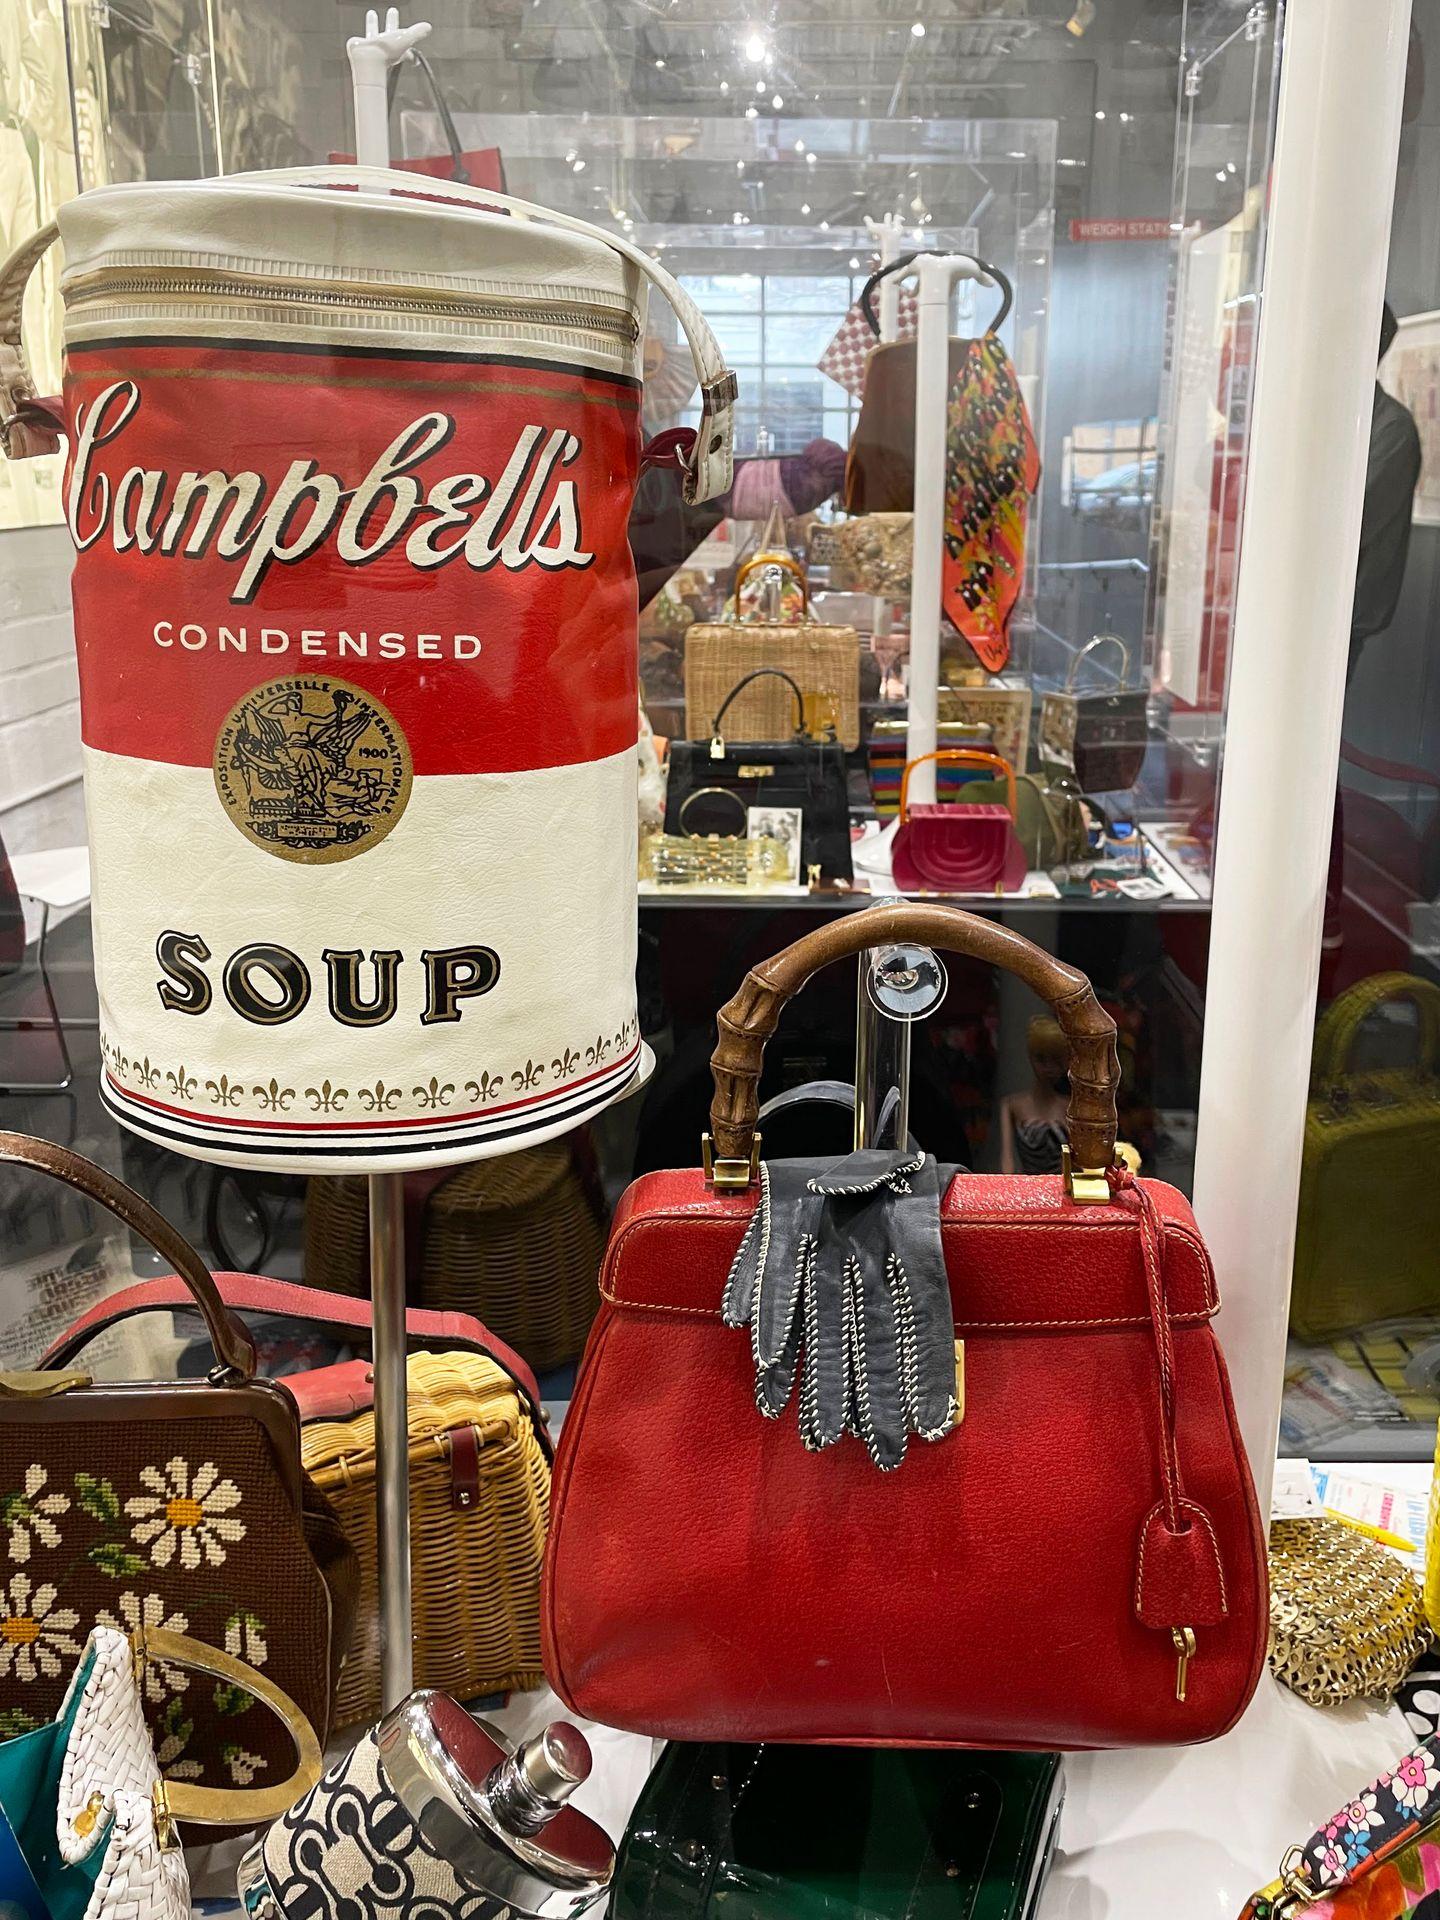 A close up view of a Campbell's soup purse and a red purse with some gloves draped over it.